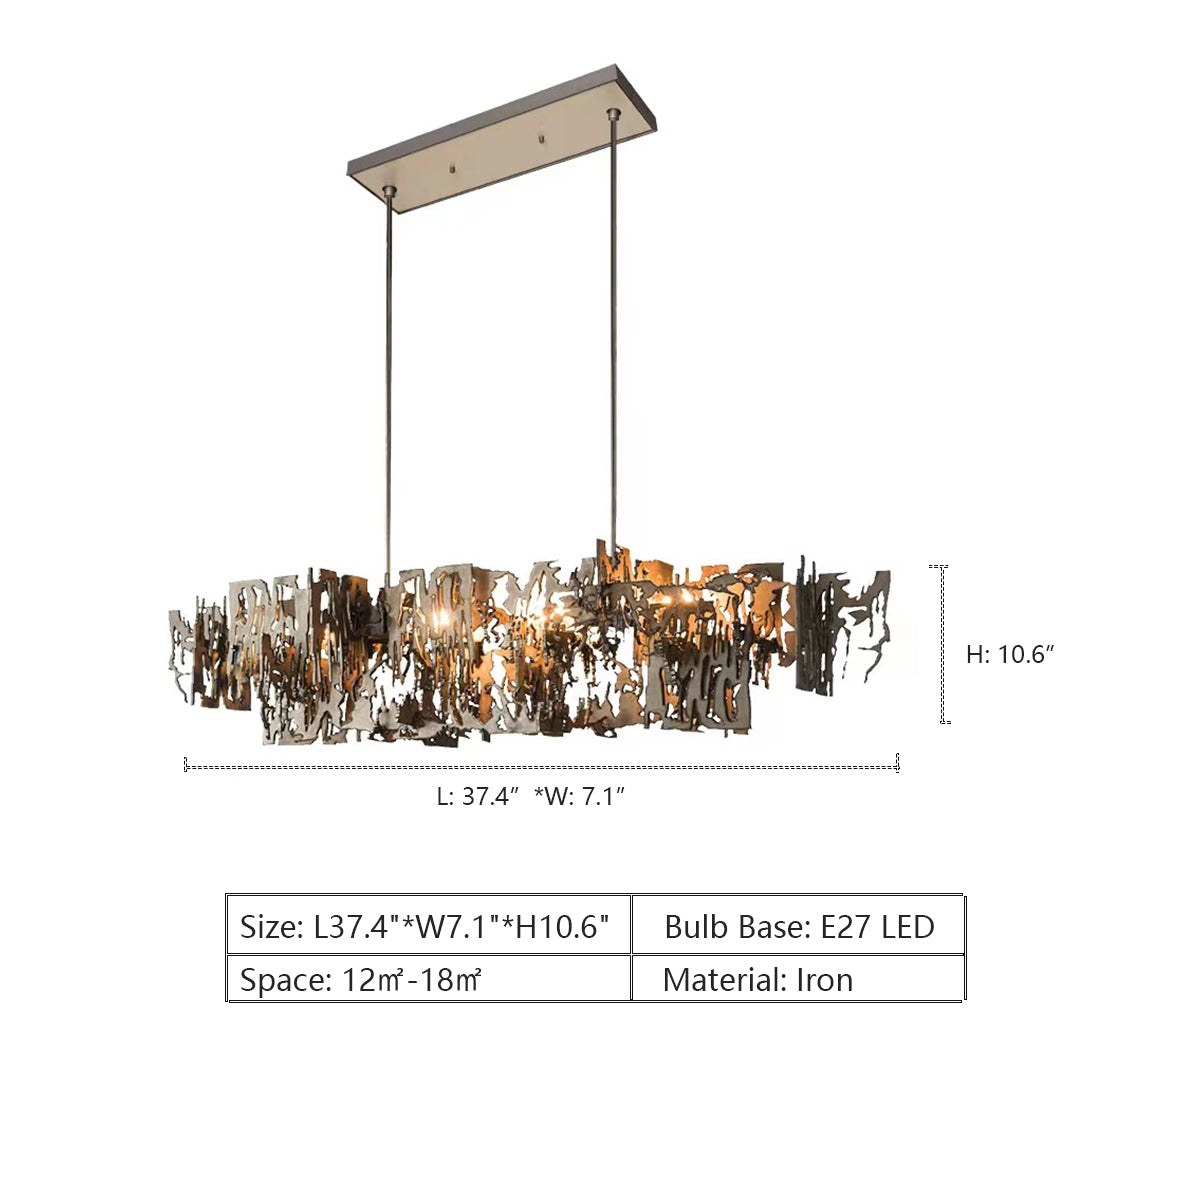 L37.4"*W7.1"*H10.6"  extra large, oversized, art, irregular, iron, post modern, pendant, chandelier, for large space, long dining table, big living room, bar, kitchen island